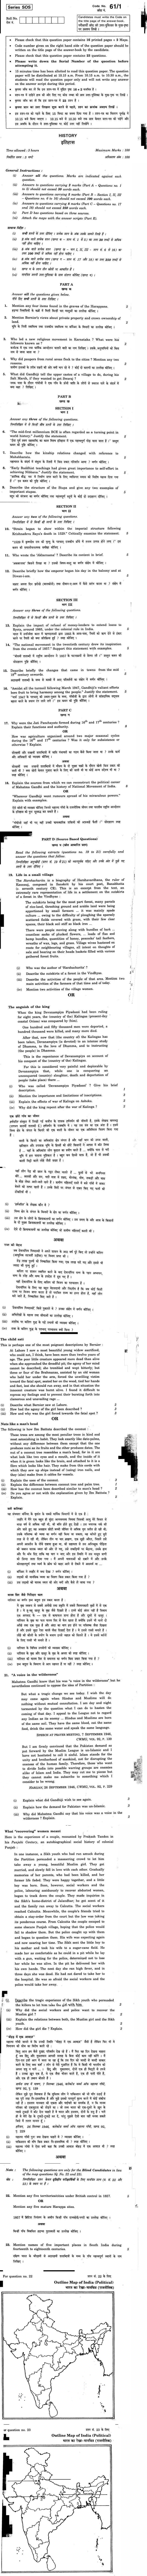 CBSE Class XII Previous Year Question Papers 2011 History